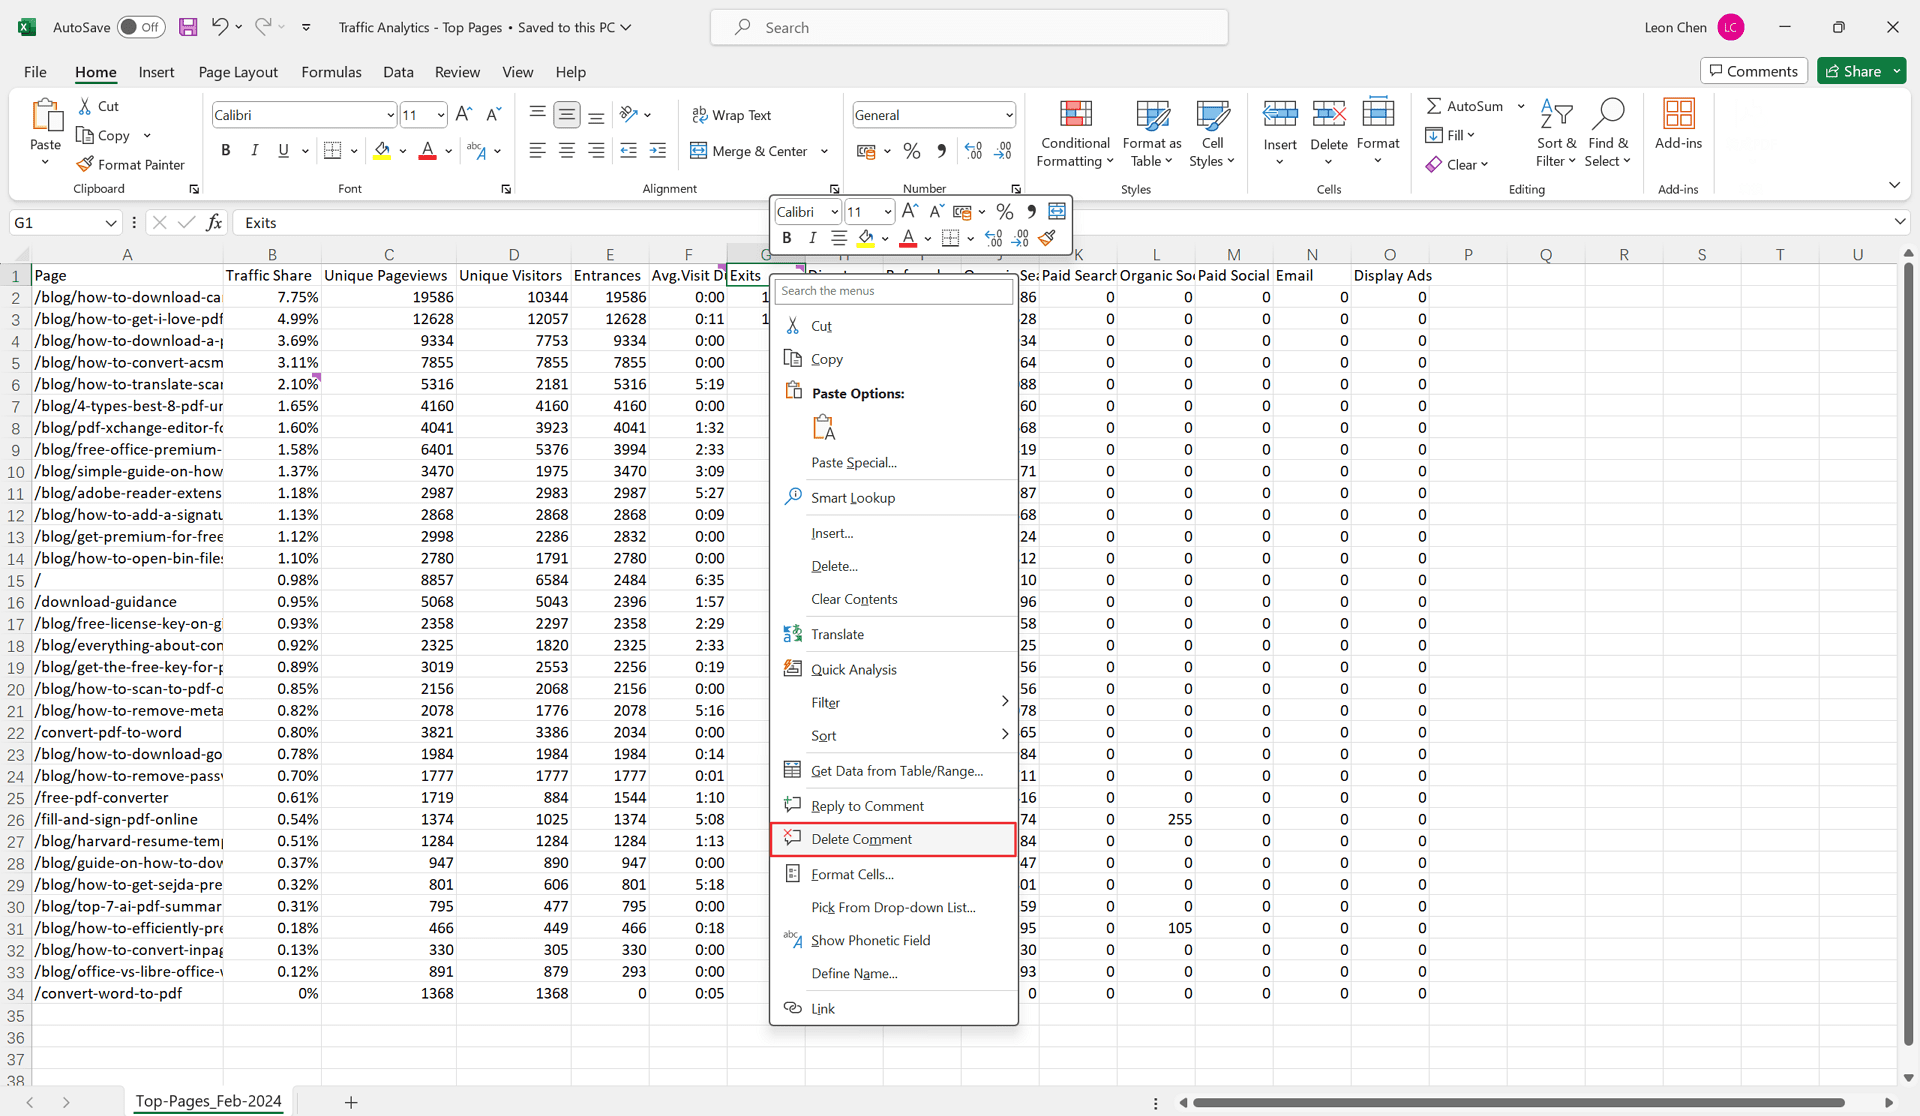 Remove Comments from Individual Cells in Using the Right-Click Menu